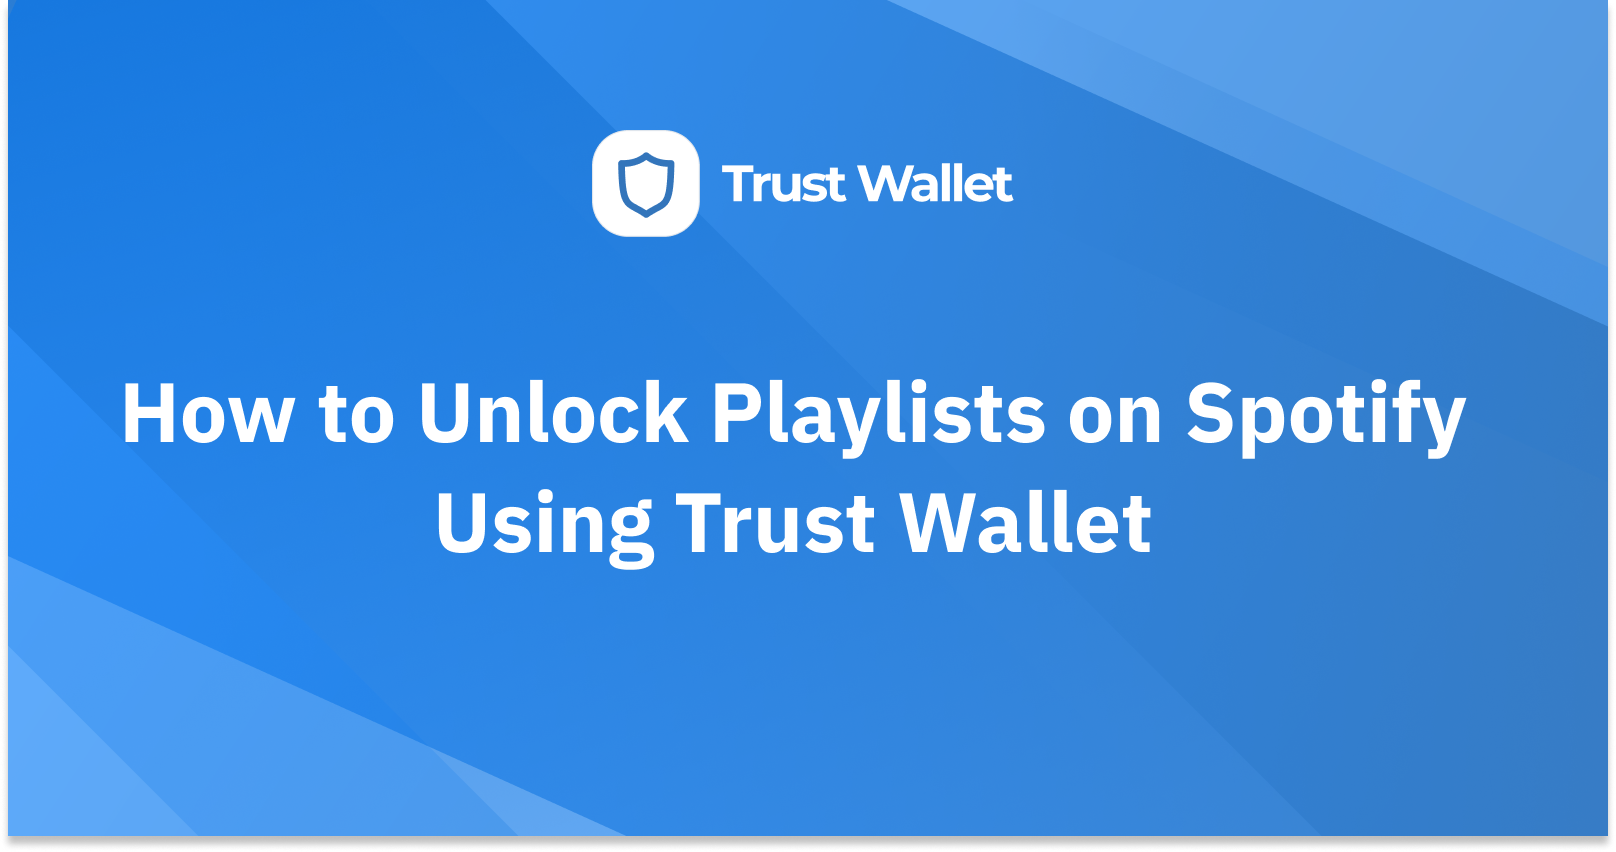 How to Unlock Playlists on Spotify Using Trust Wallet